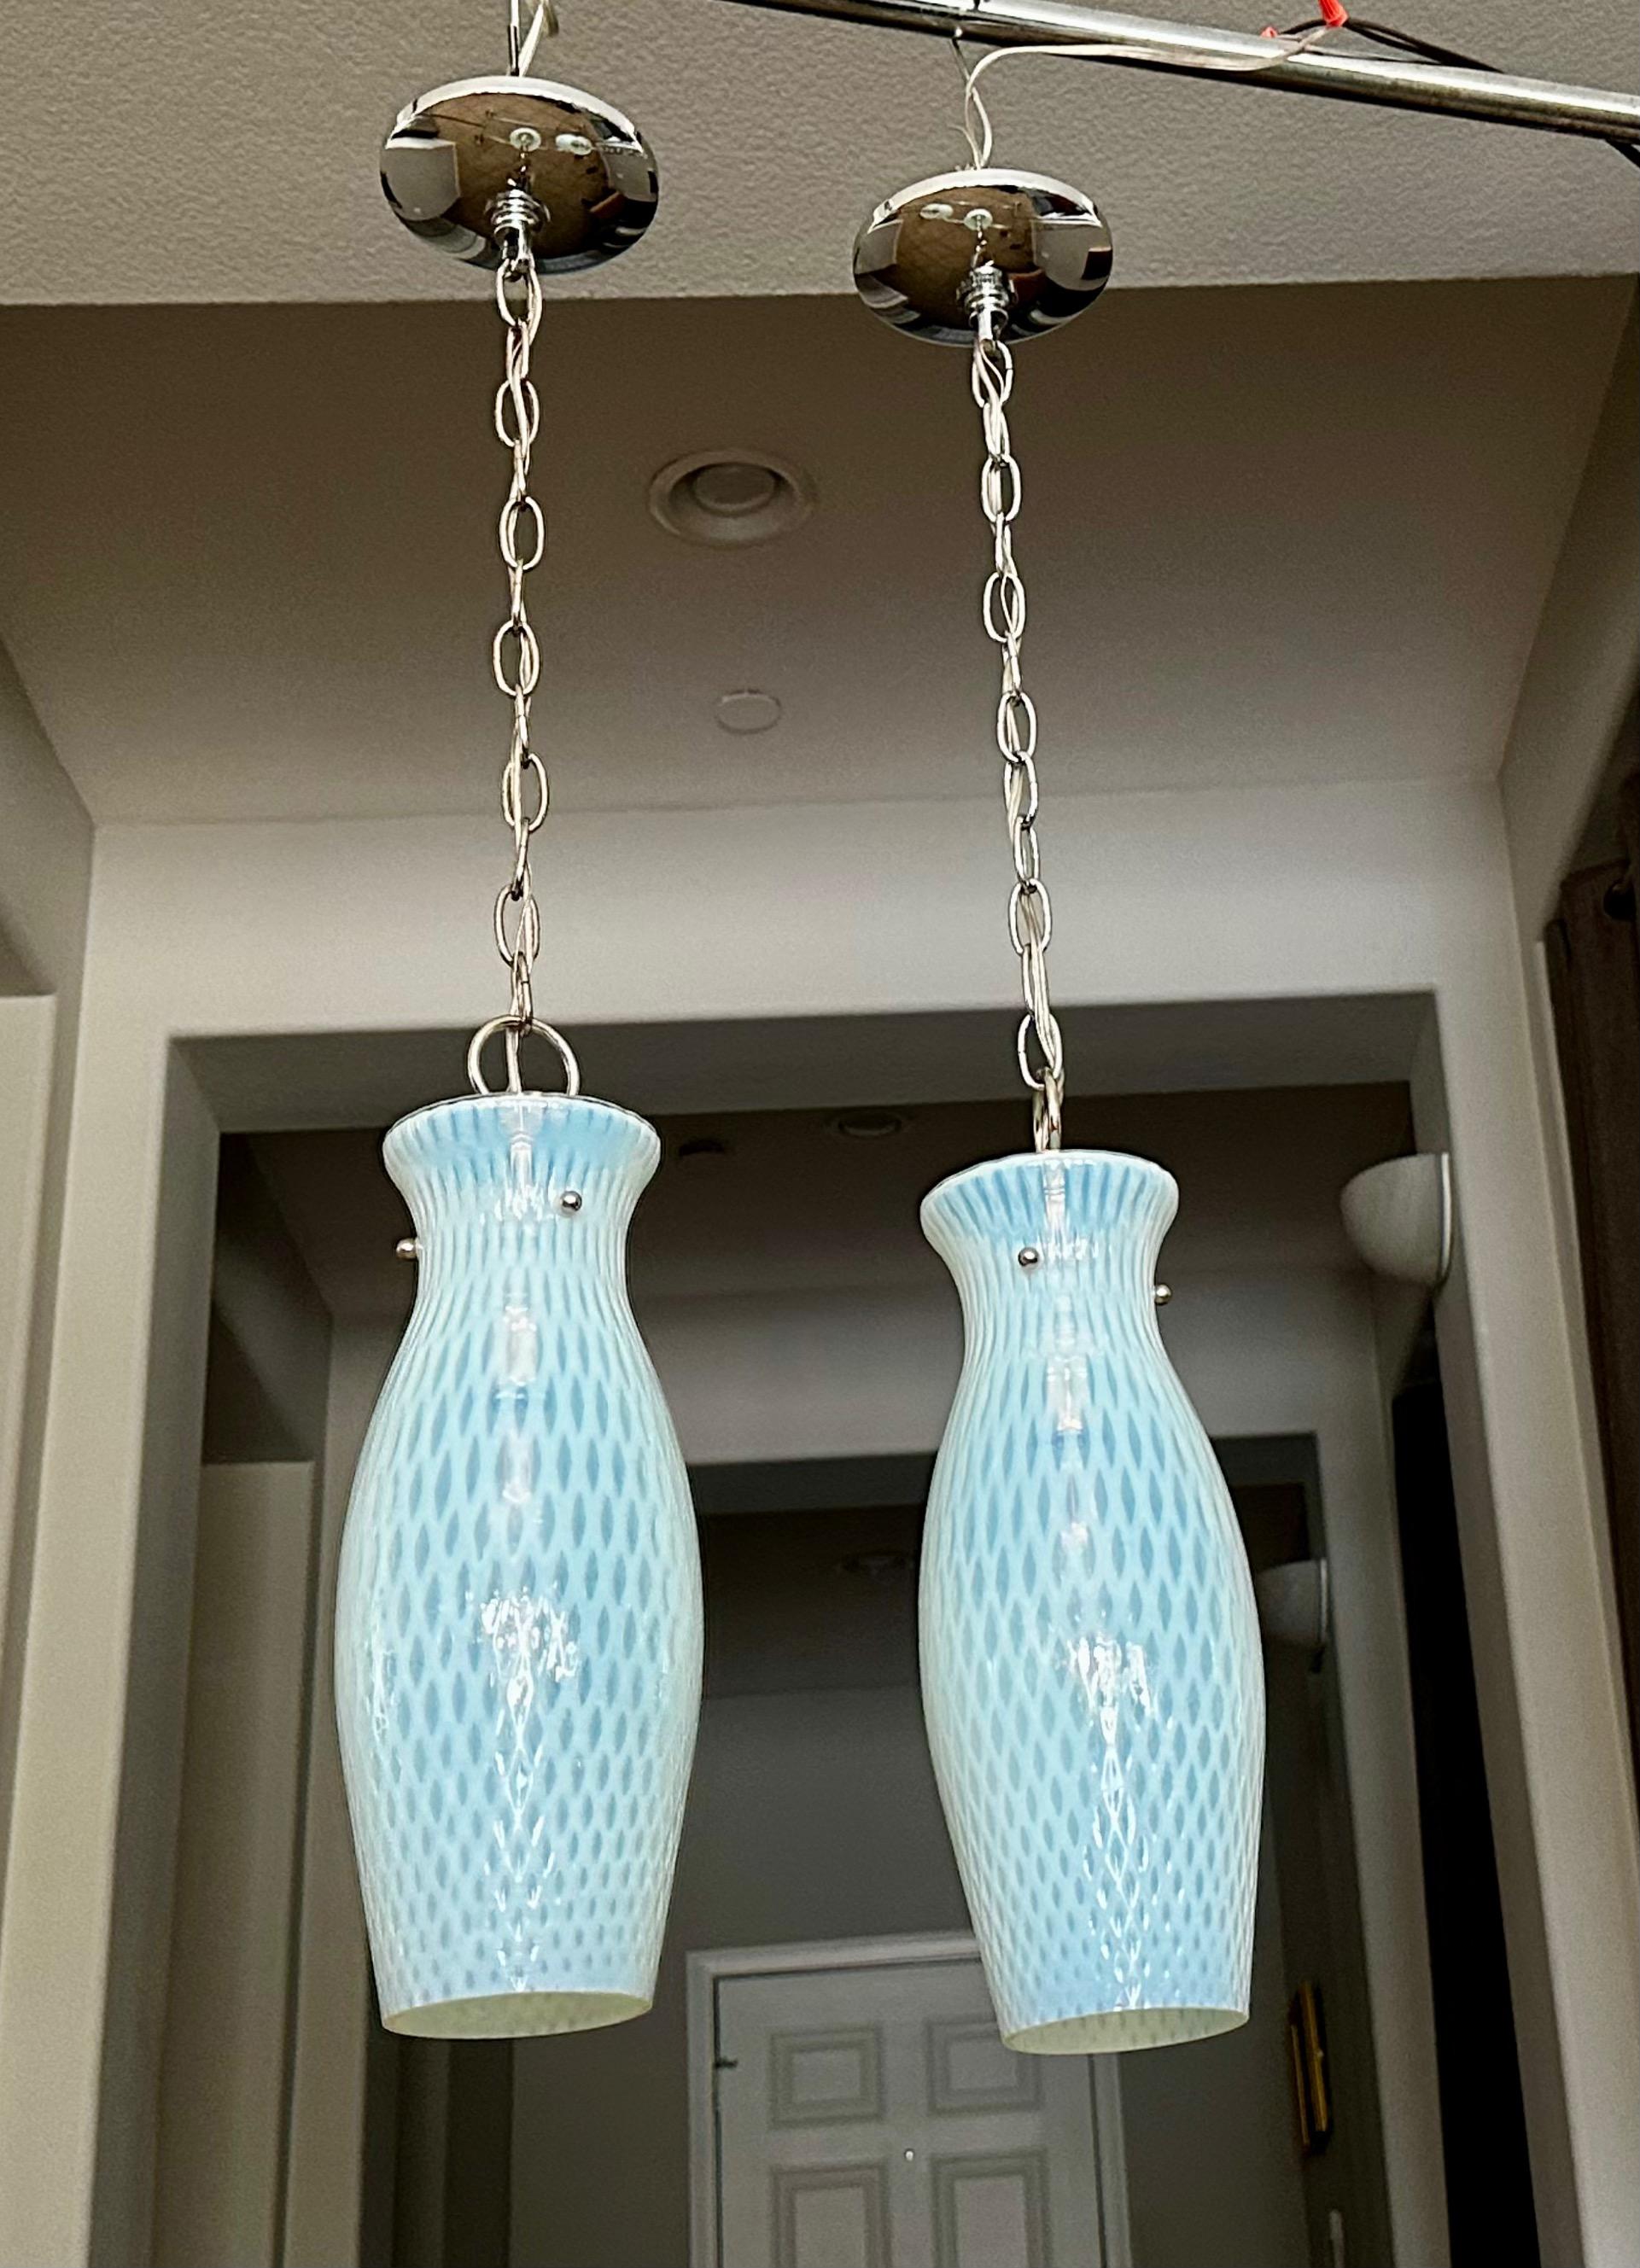 Pair Italian Murano hand blown opalescent blue glass ceiling light pendants. The opalescent glass has a diamond pattern throughout. All new nickel finish hardware including socket, chain and canopy. Uses single regular A base bulb. 
Fixture size 14